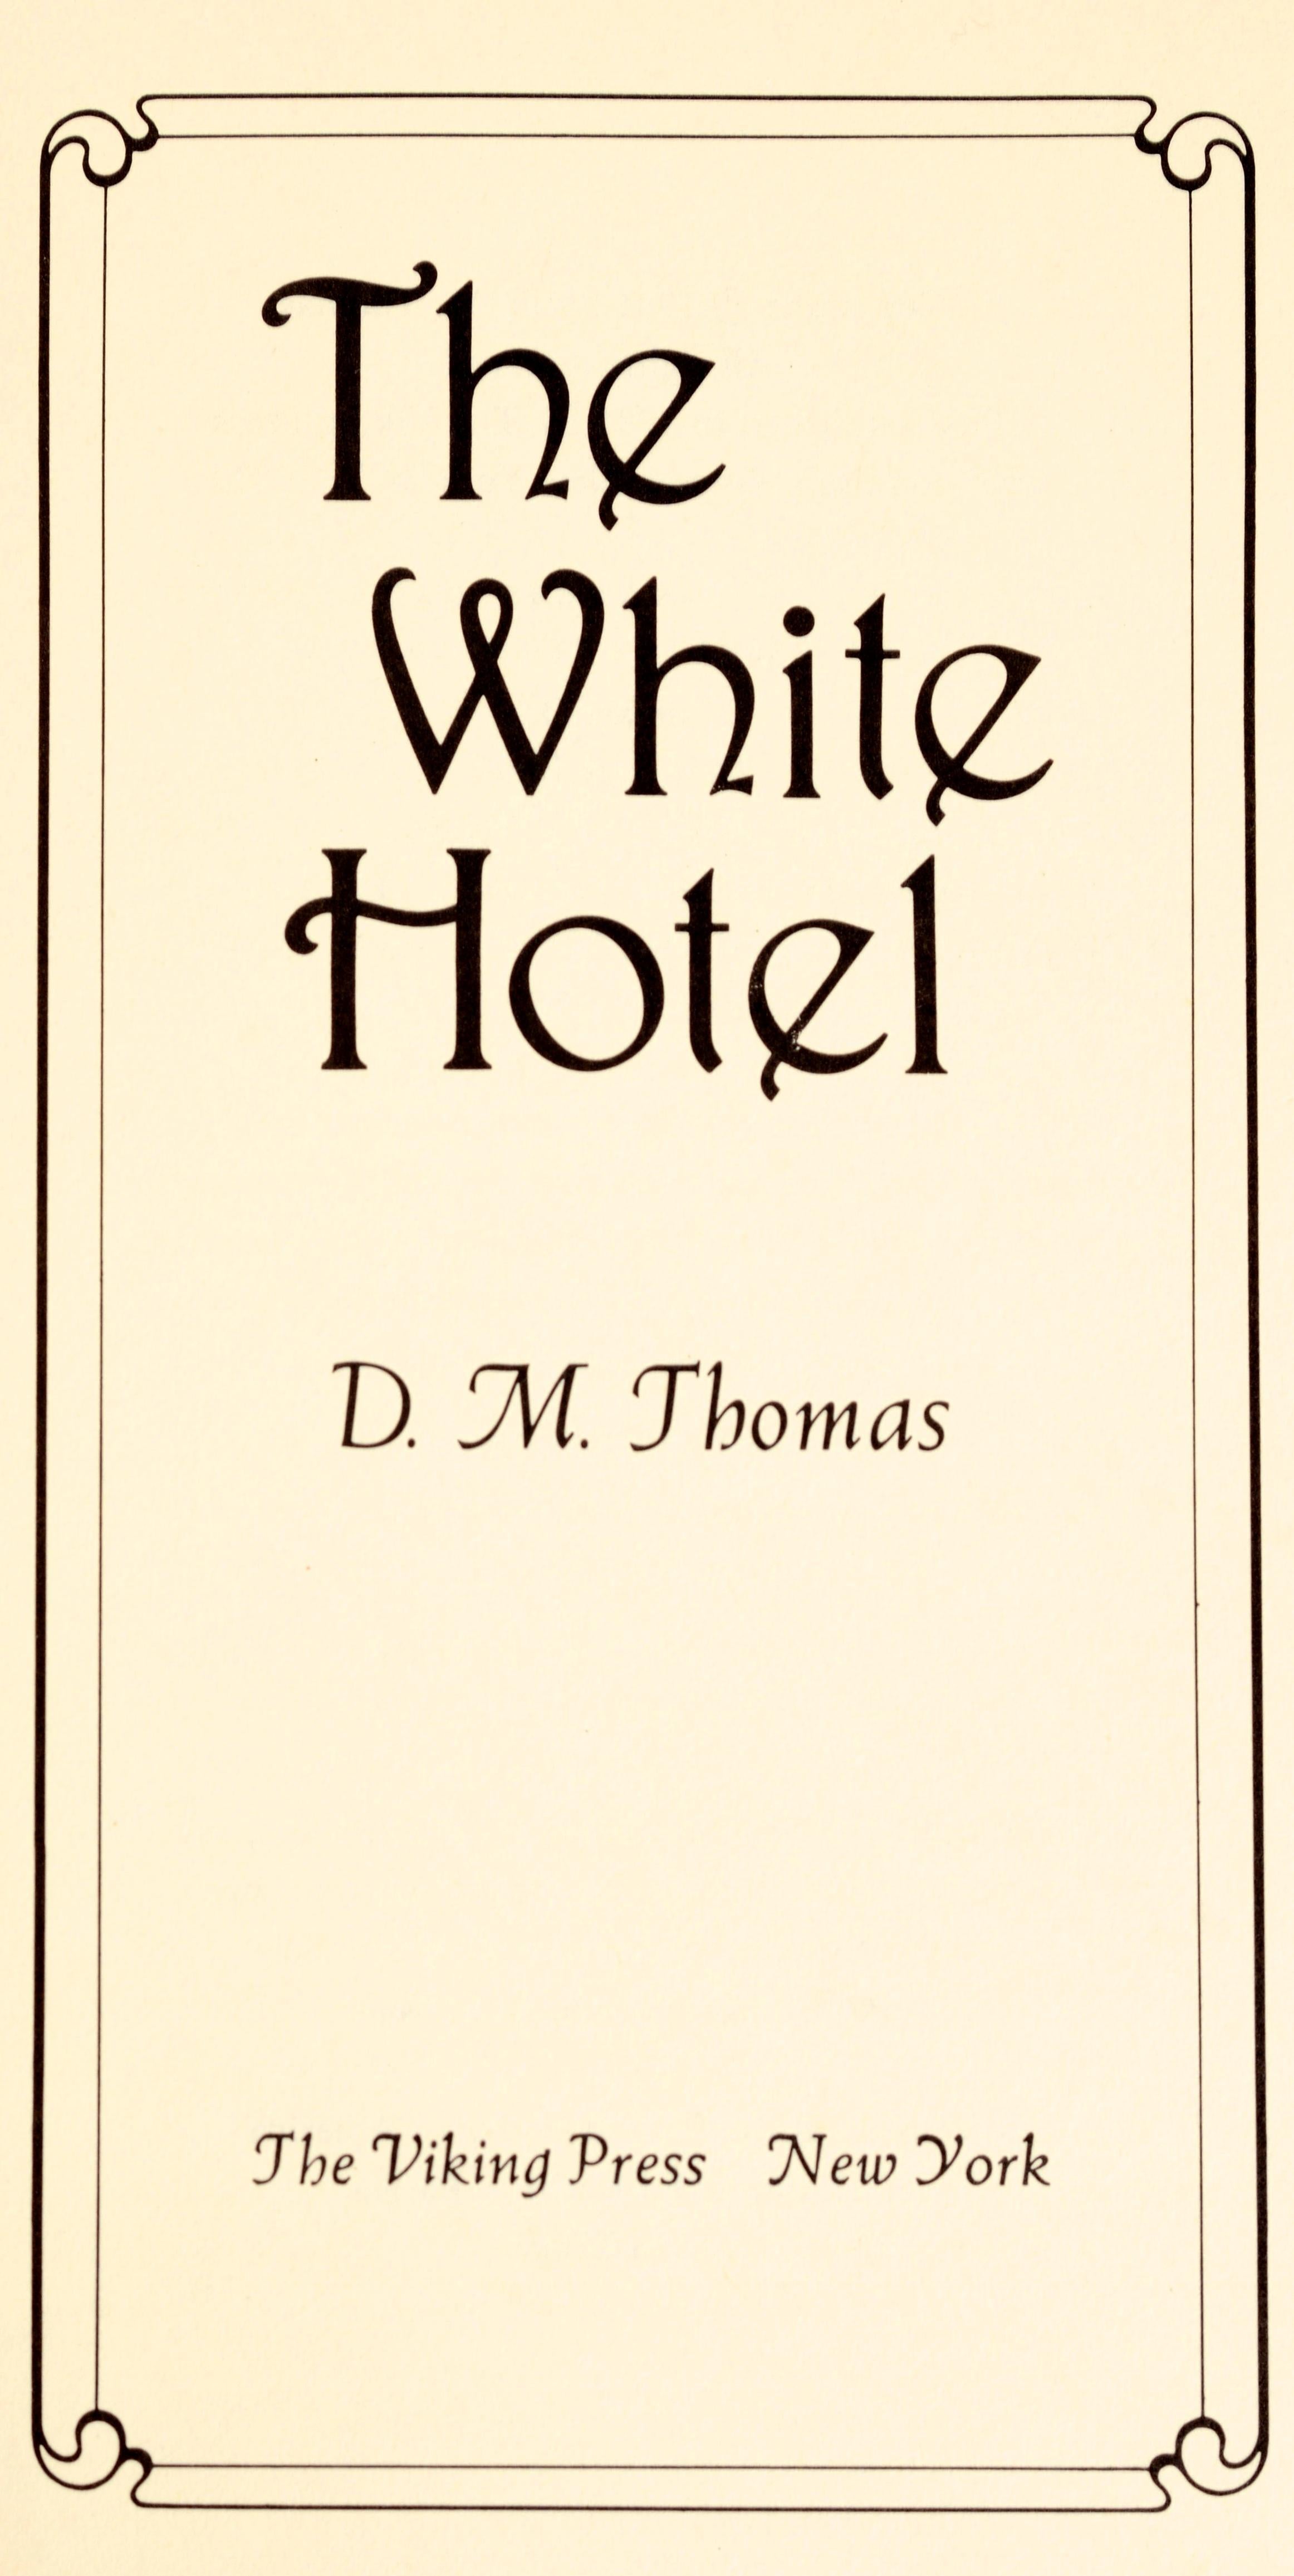 The White Hotel by D. M. Thomas. Published by Viking, 1981. The White Hotel is a novel written by the British poet, translator and novelist D. M. Thomas. It was first published in January 1981 by Gollancz in the United Kingdom and in March 1981 by